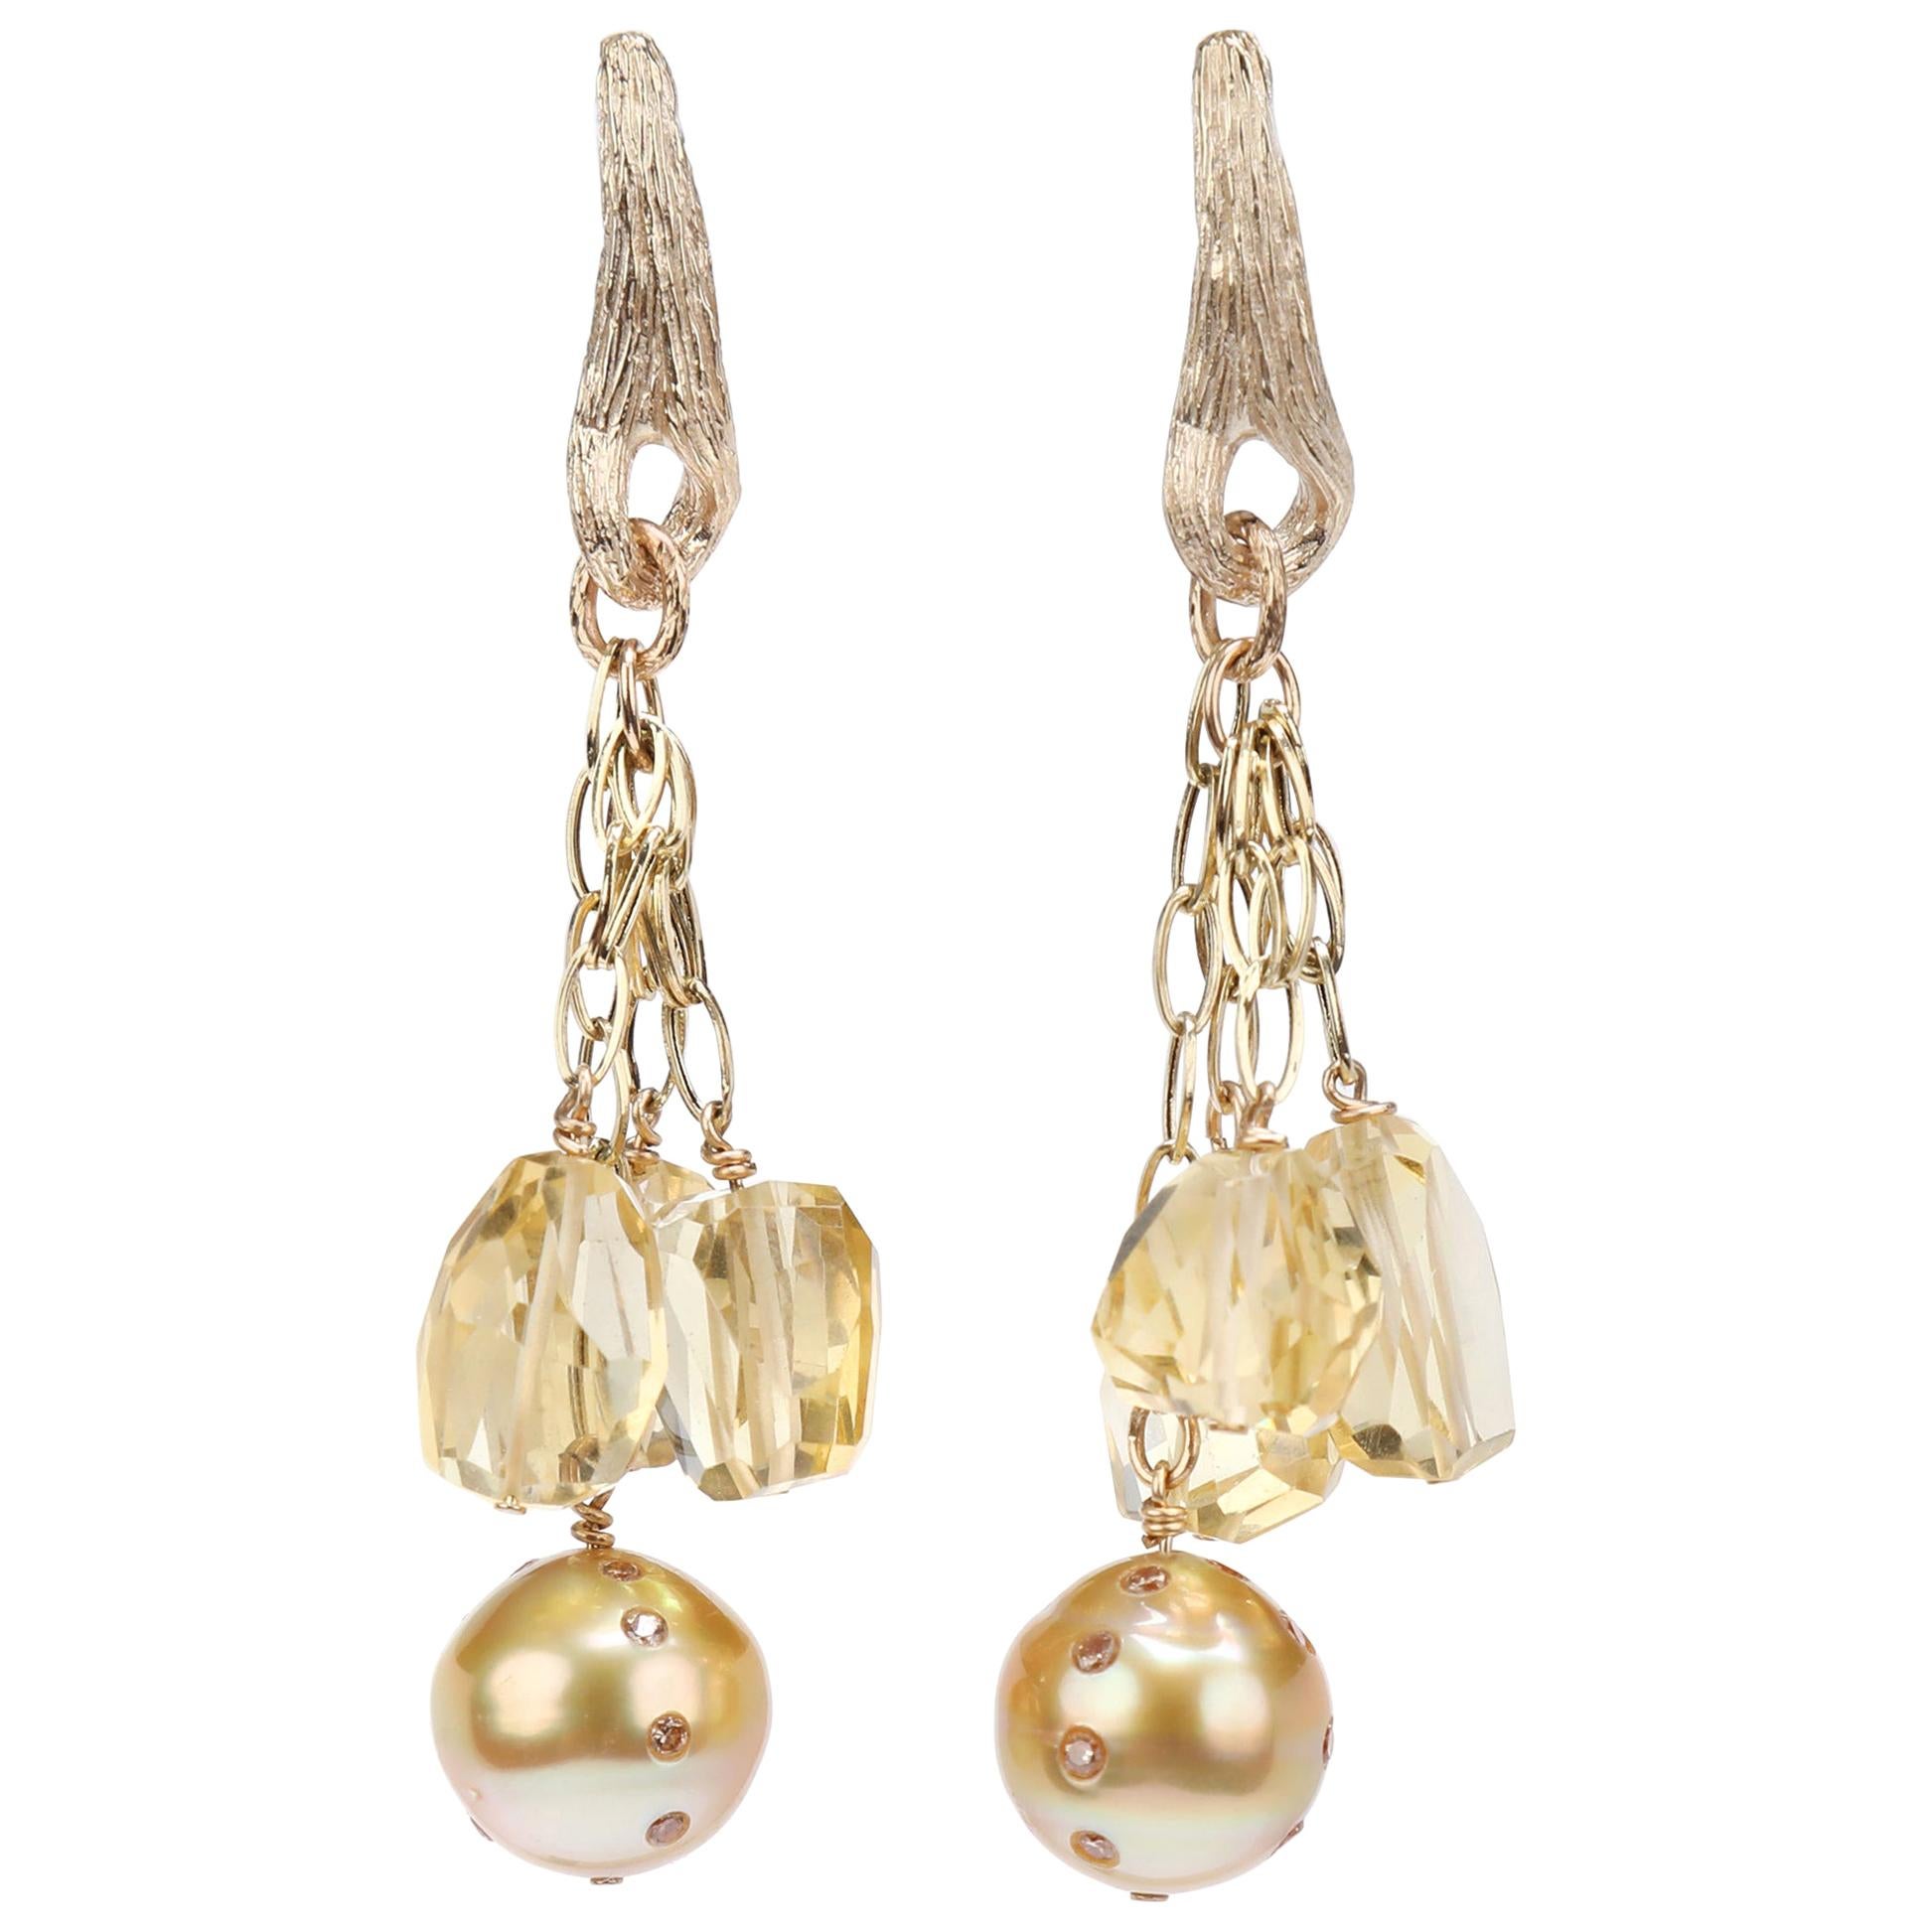 South Sea Pearl, Diamond, Citrine, and Gold Chandelier Earrings